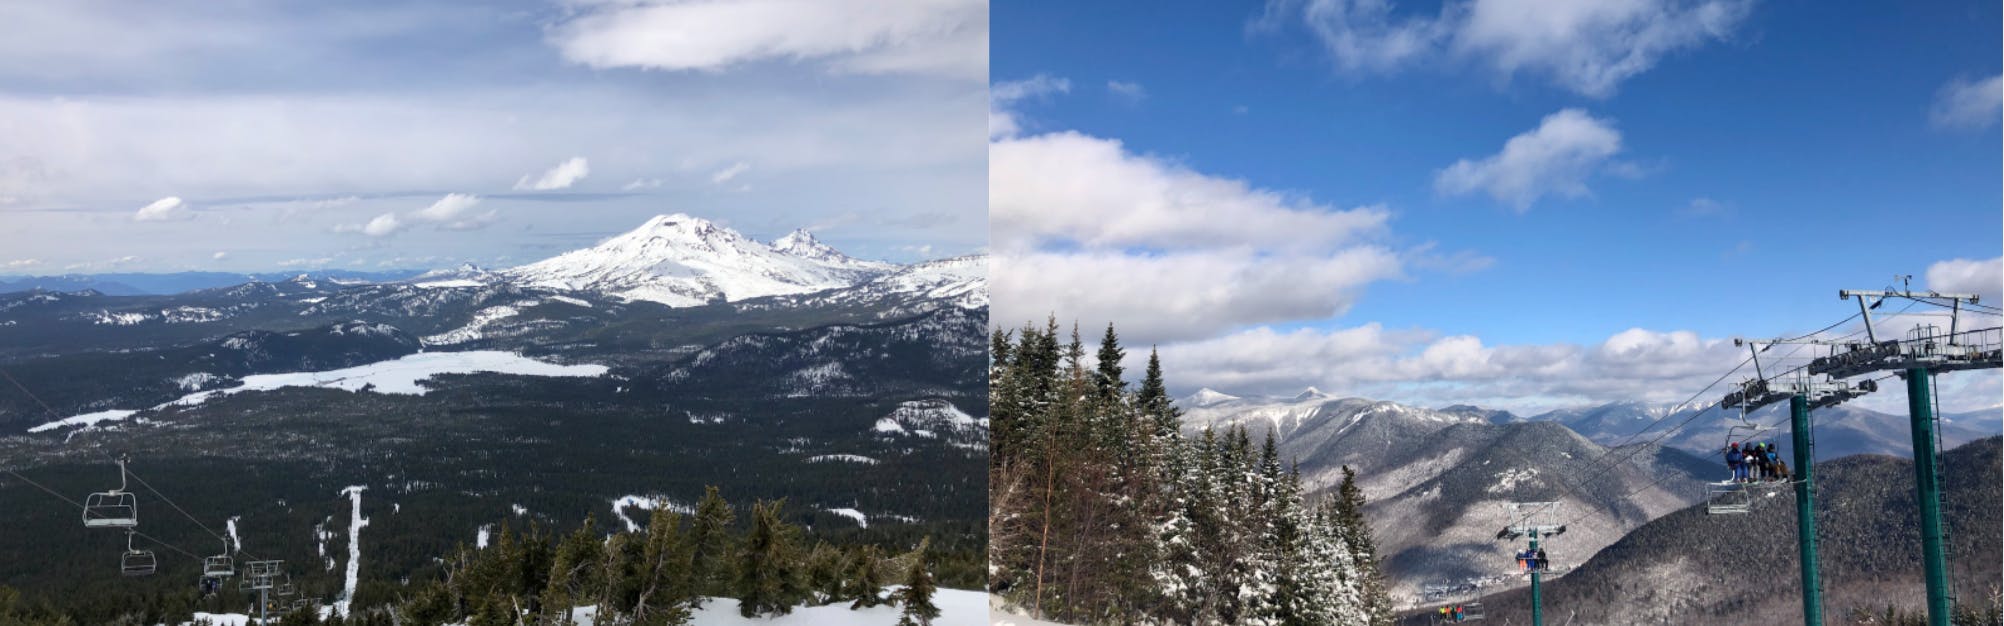 Two photos. On the left is Mount Bachelor. There is a lift visible along with several steep peaks. On the right is Loon Mountain and there is a lift visible with several smaller hills.